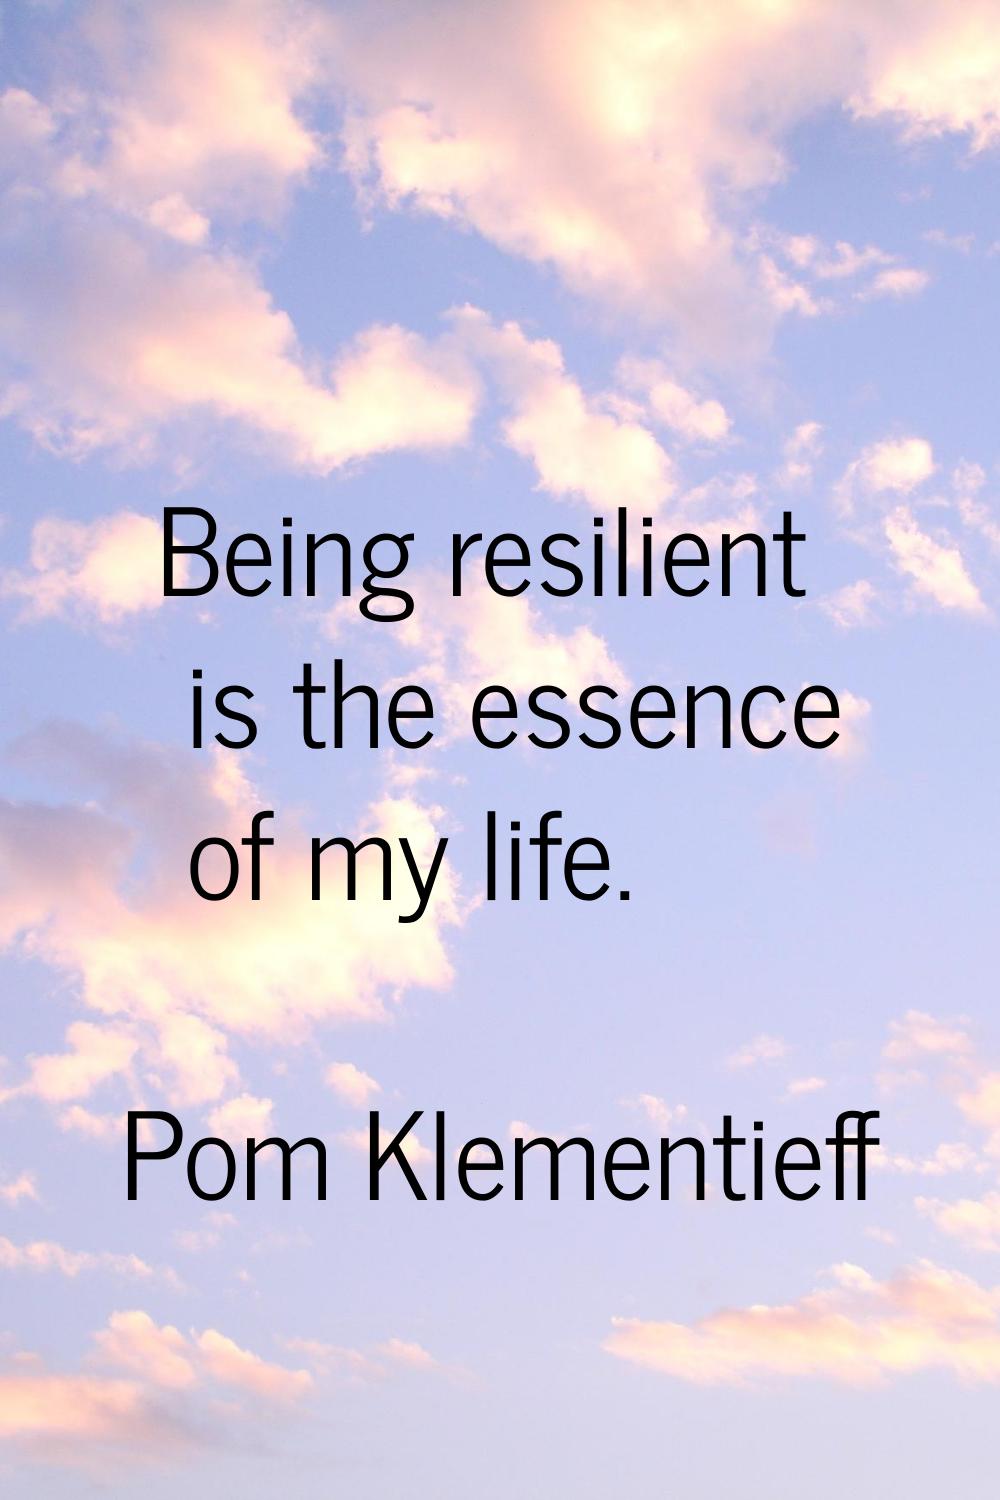 Being resilient is the essence of my life.